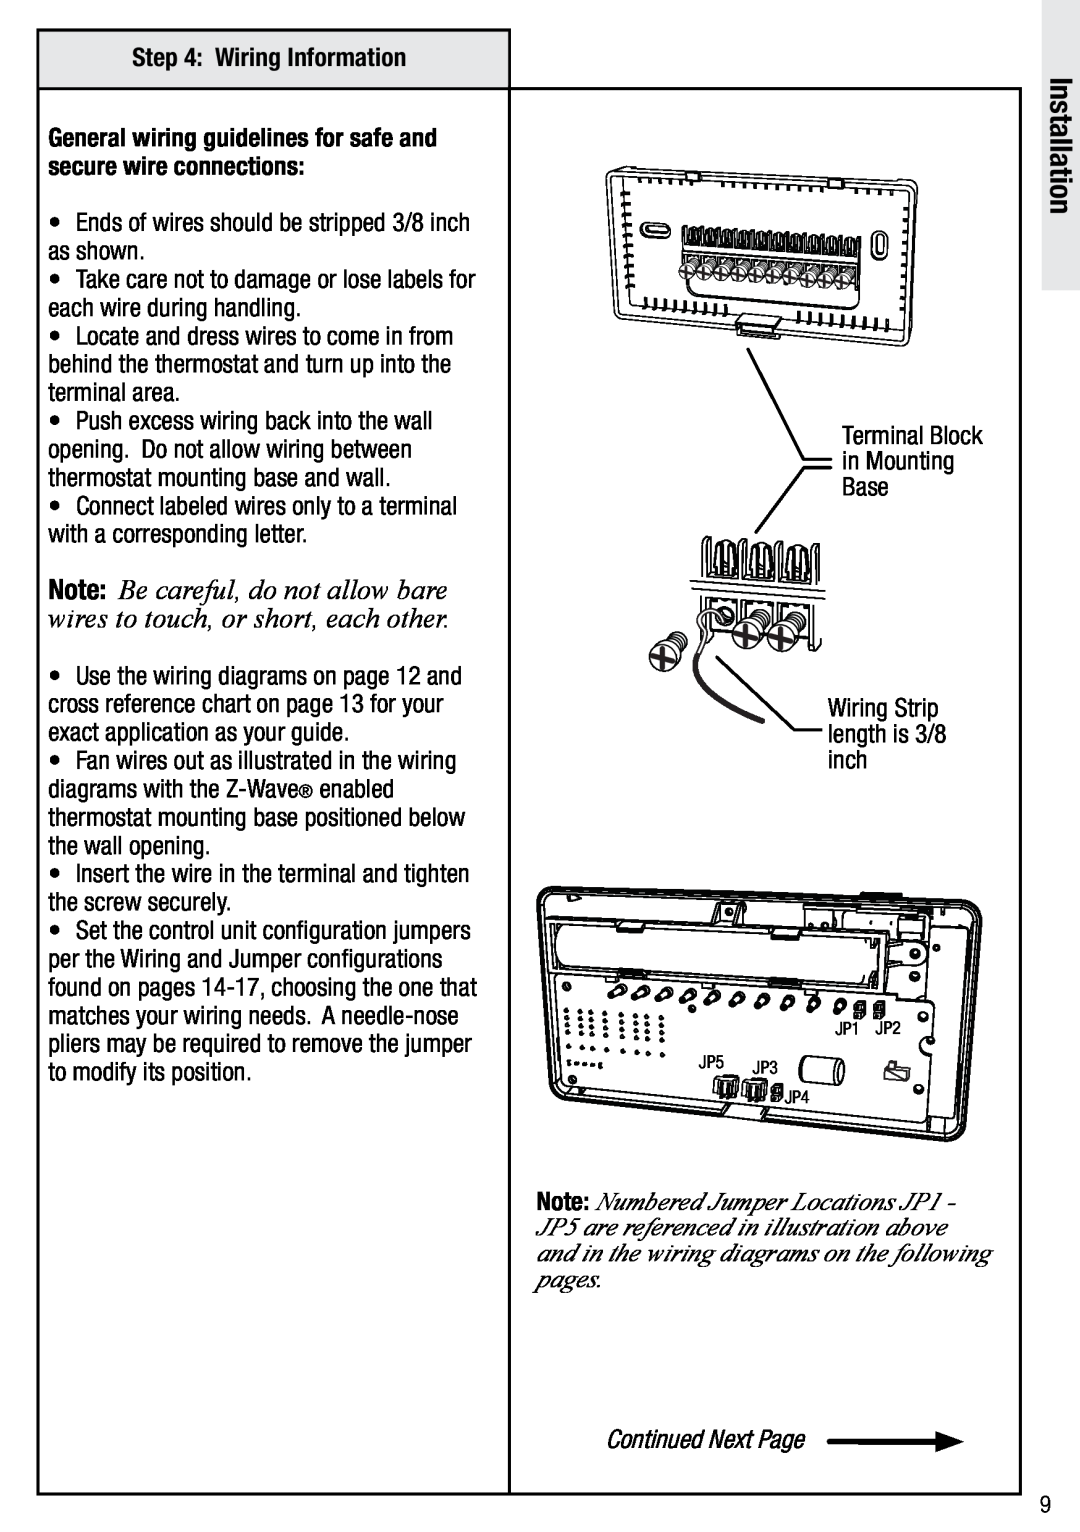 Wayne-Dalton WDTC-20 user manual Installation, Note Be careful, do not allow bare, wires to touch, or short, each other 